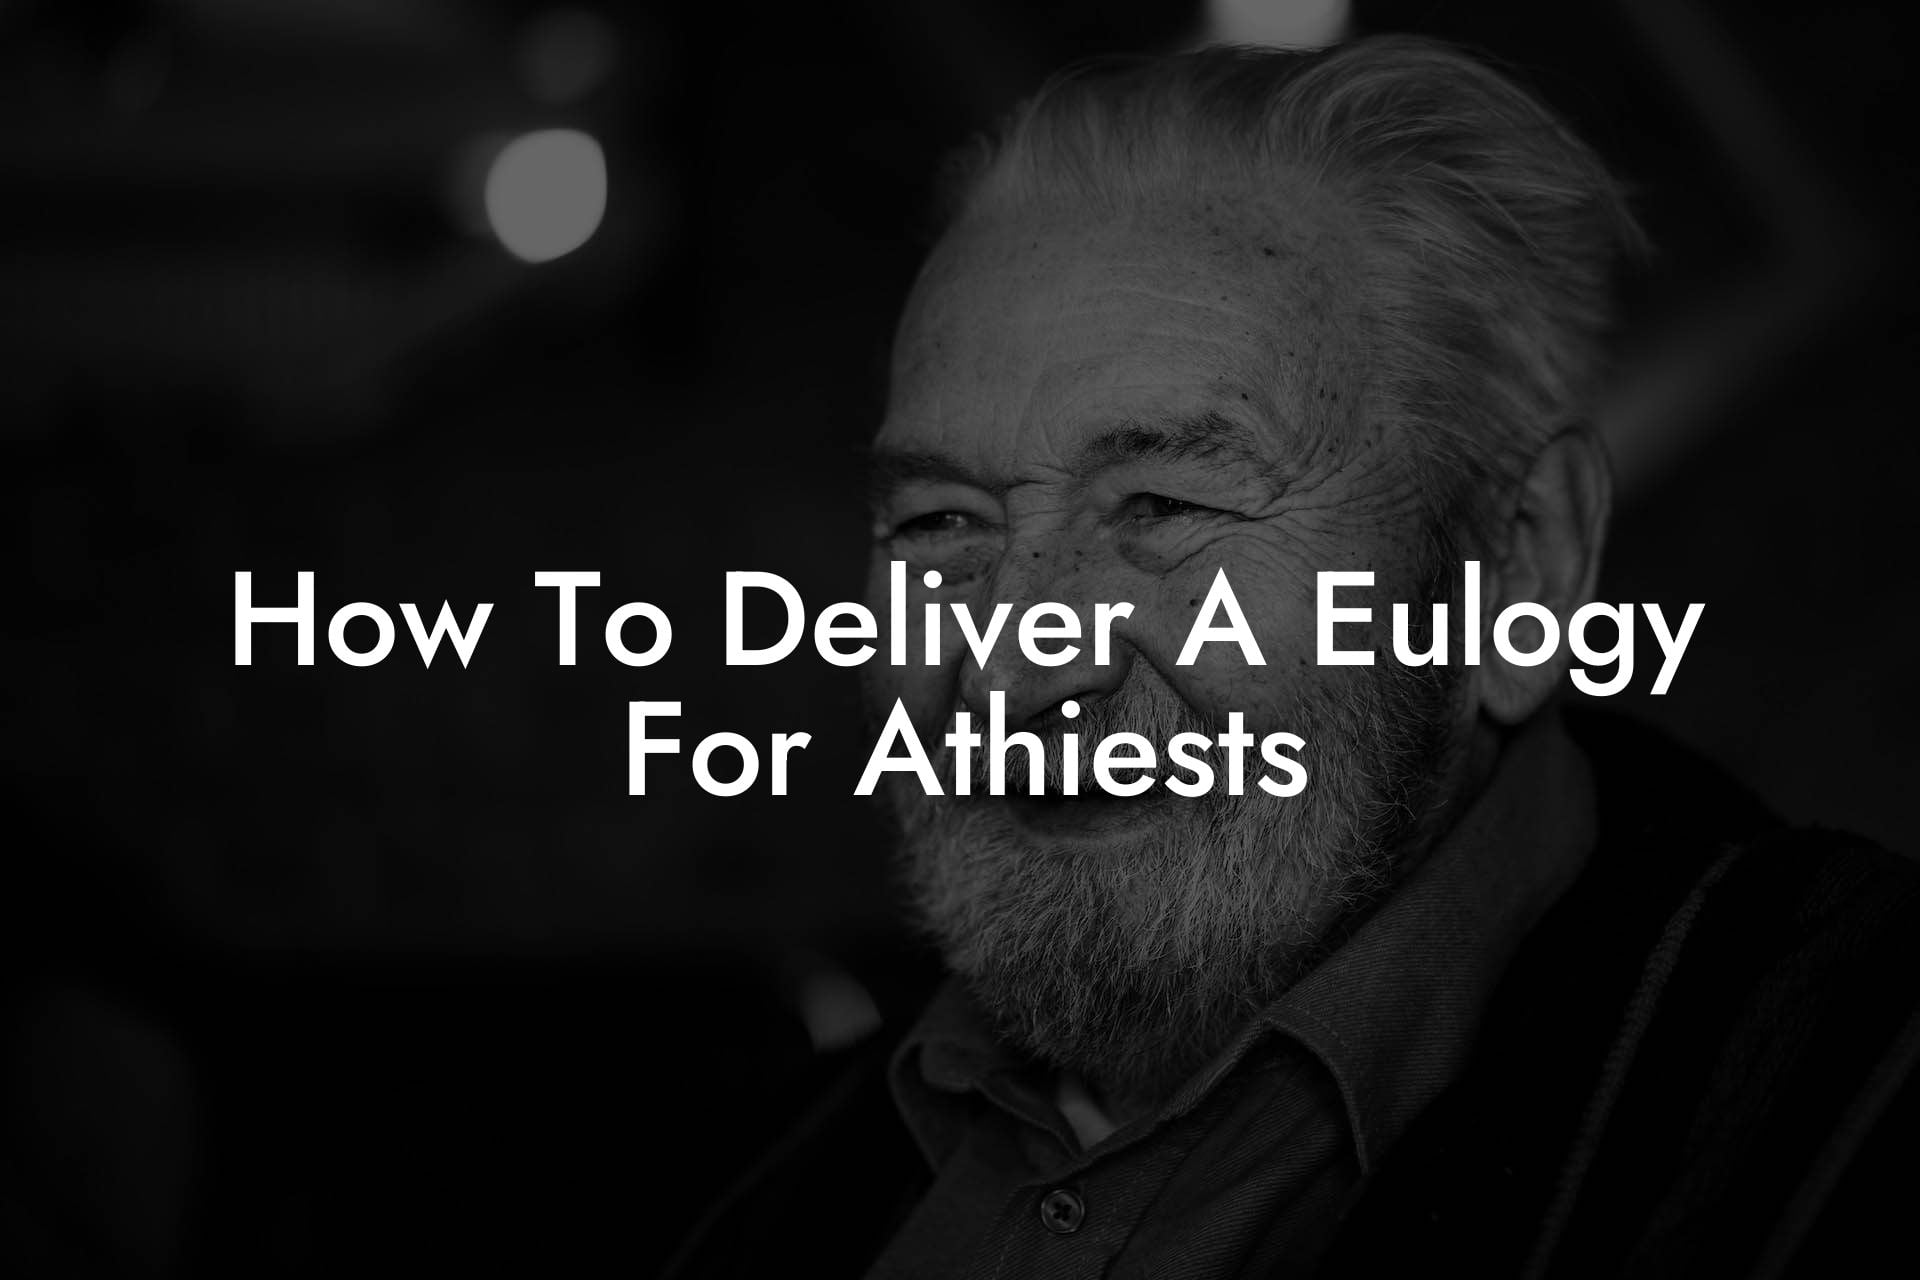 How To Deliver A Eulogy For Athiests